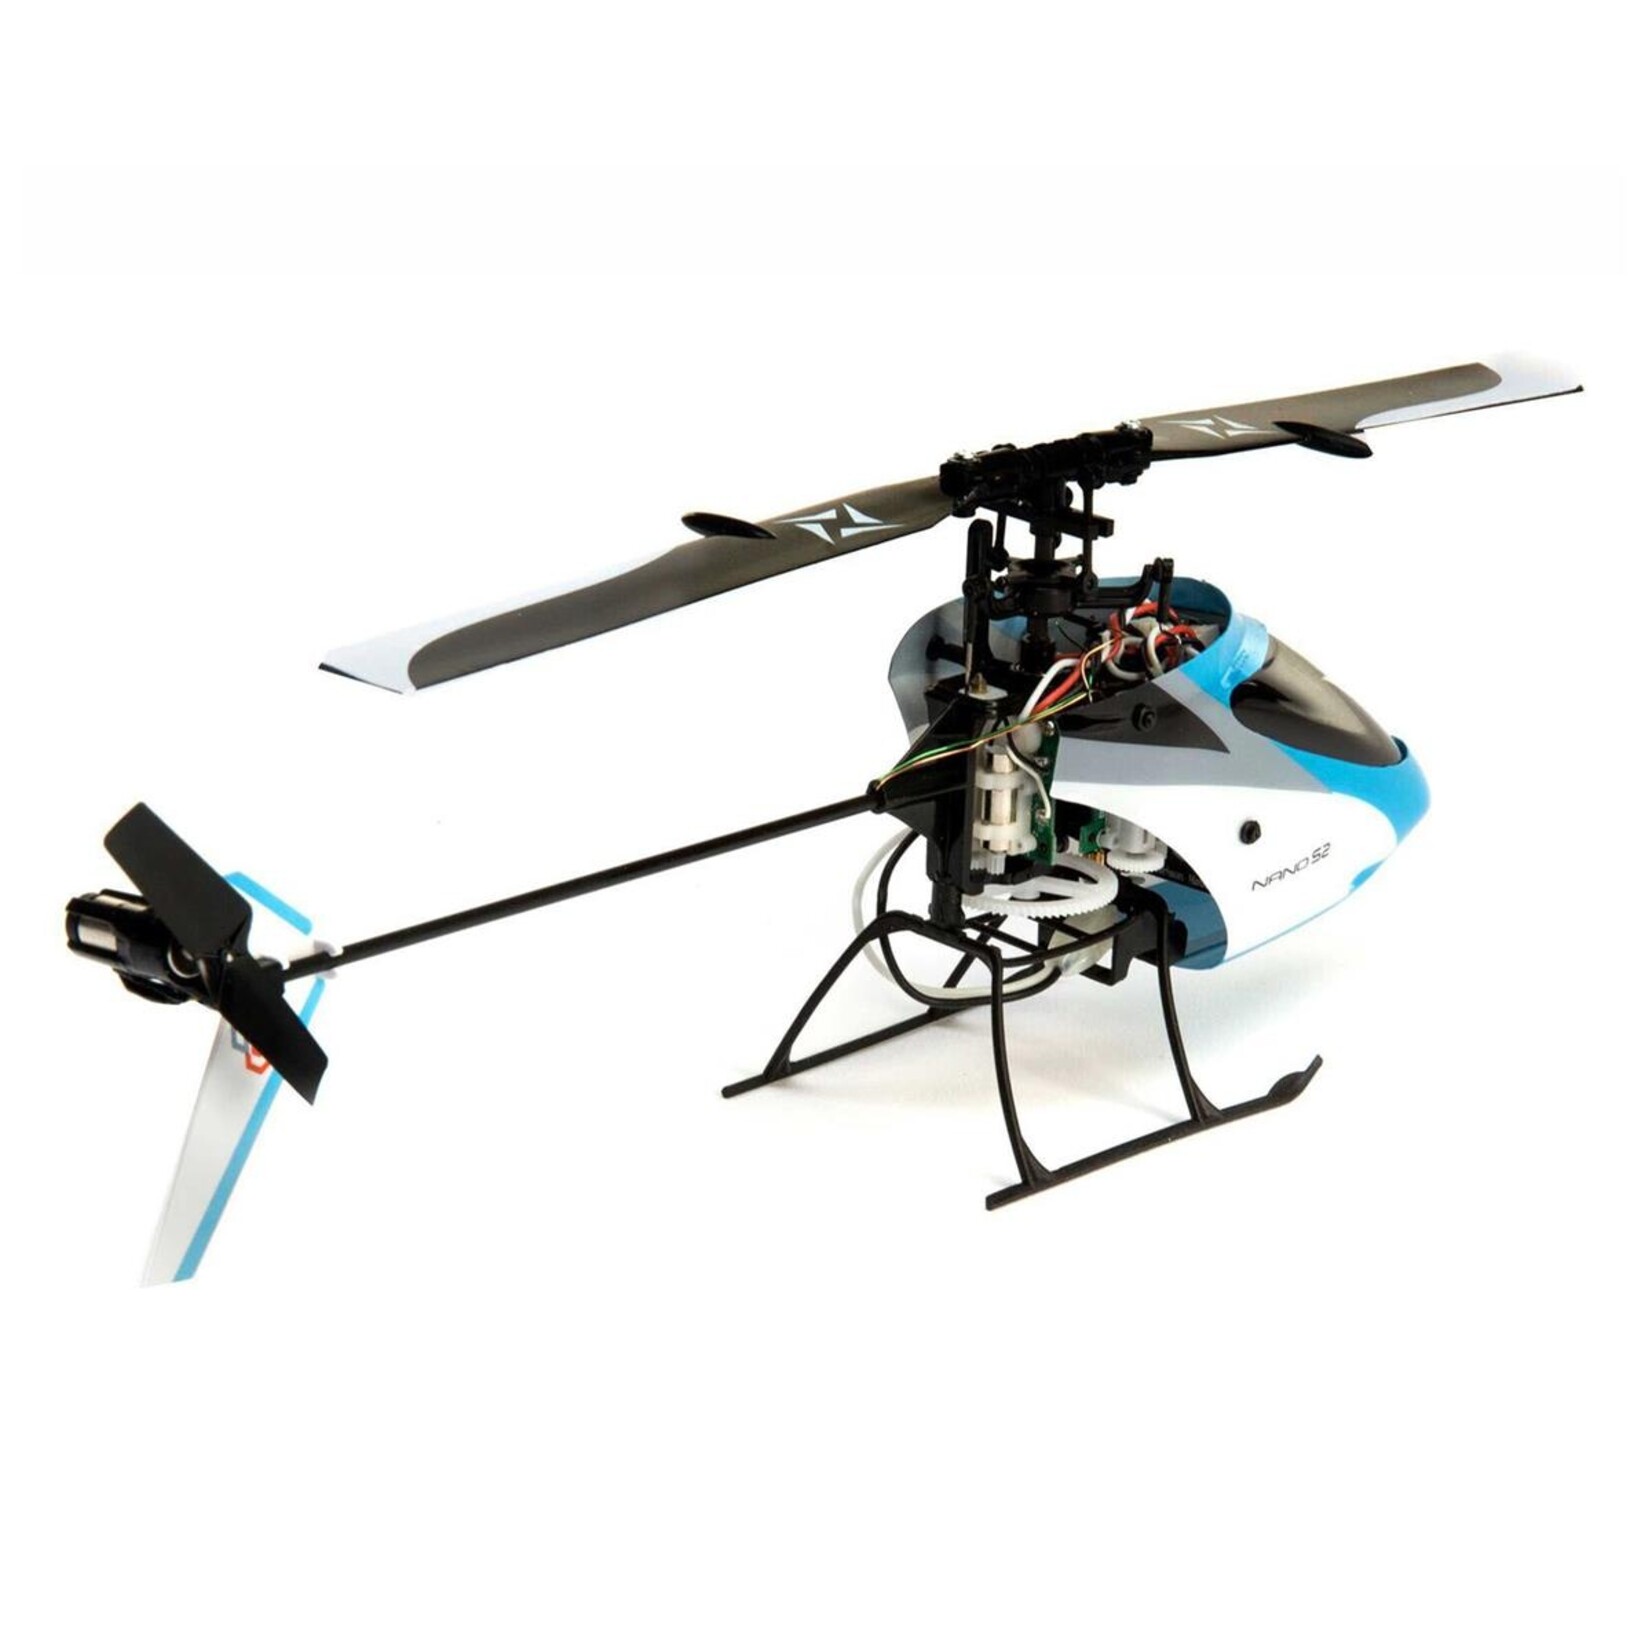 Blade Blade Nano S3 Bind-N-Fly Basic Electric Flybarless Helicopter w/AS3X & SAFE #BLH01350